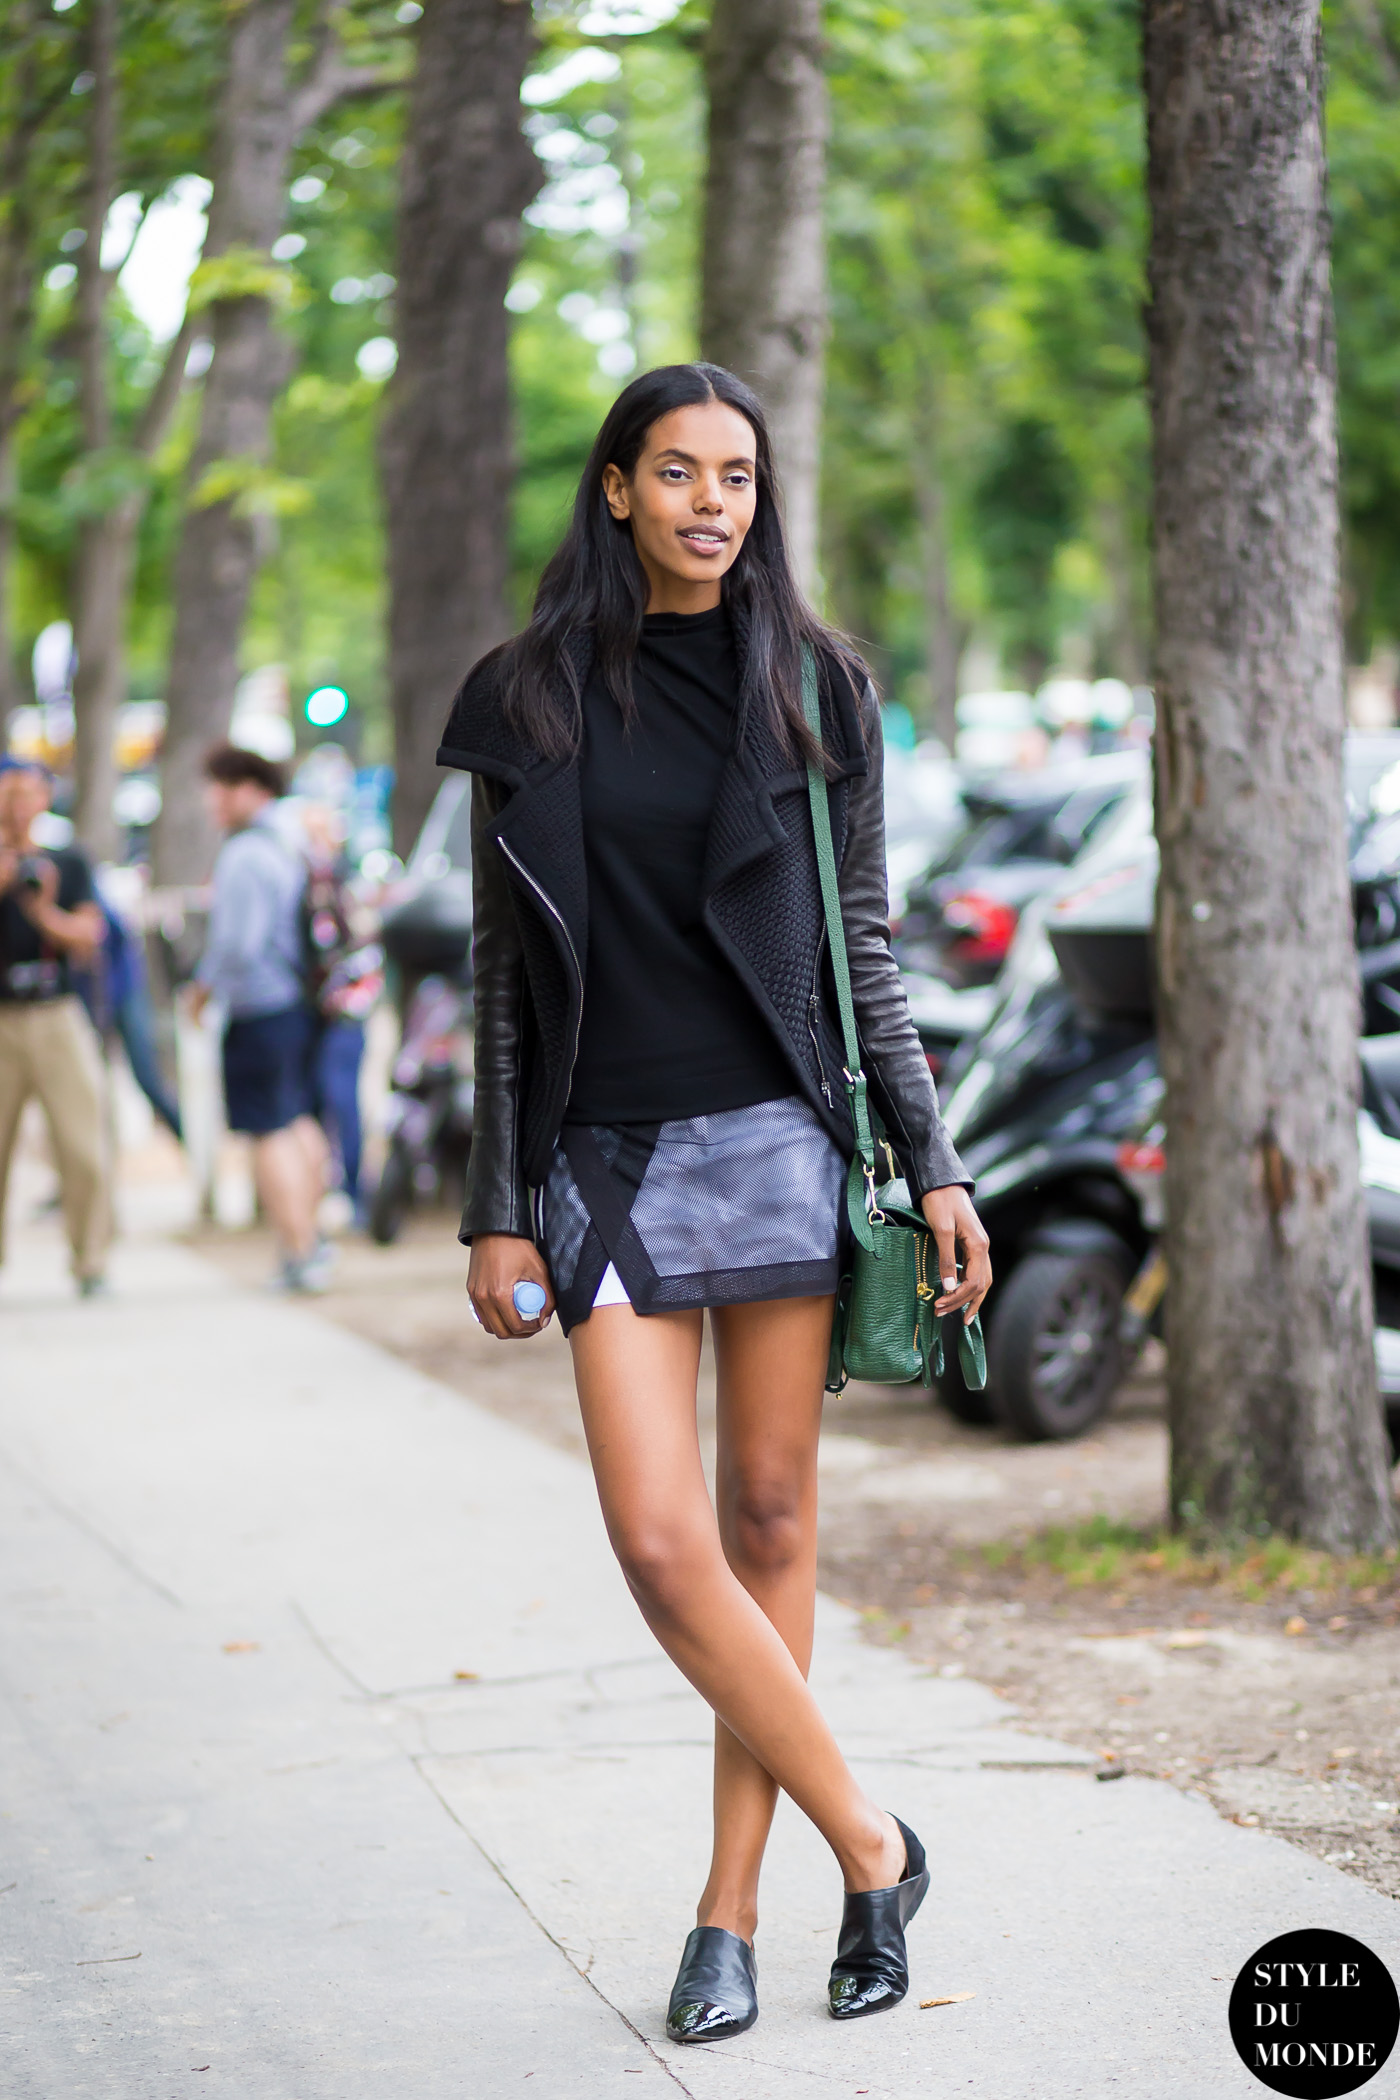 Haute Couture Fall 2014 Street Style: Grace Mahary - STYLE DU MONDE ...